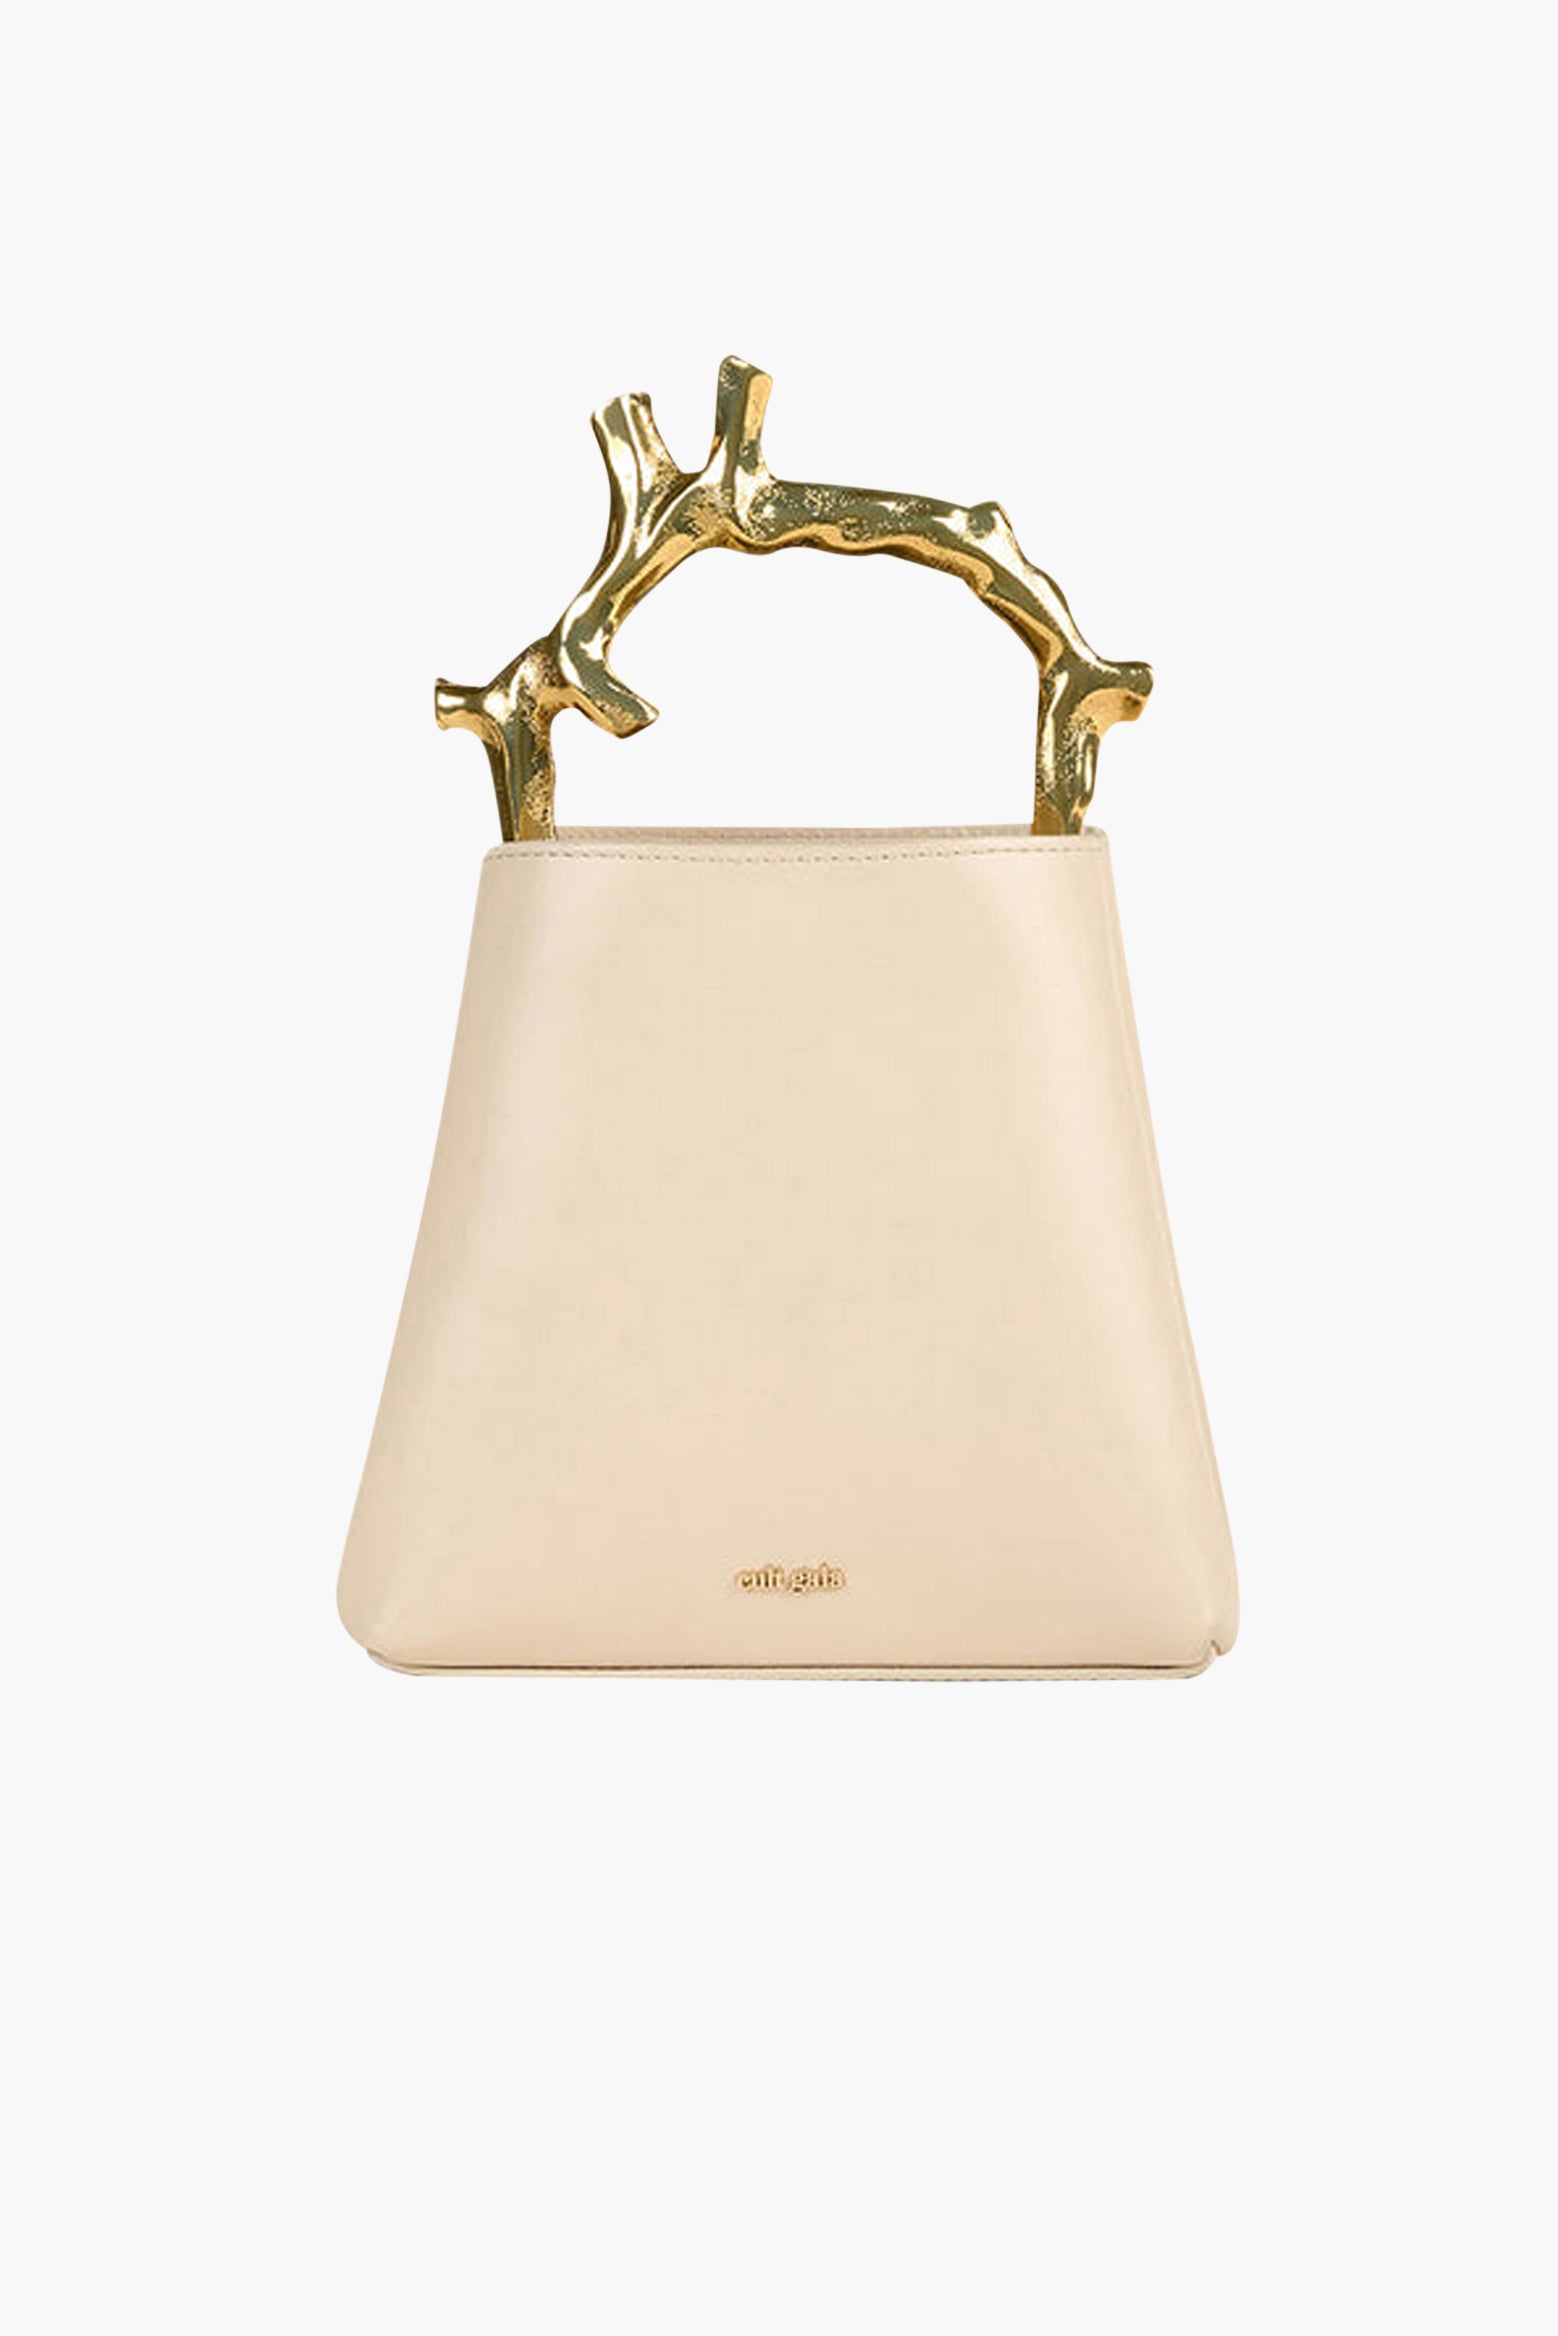 CULT GAIA Noemi Top Handle in Off-White | The New Trend